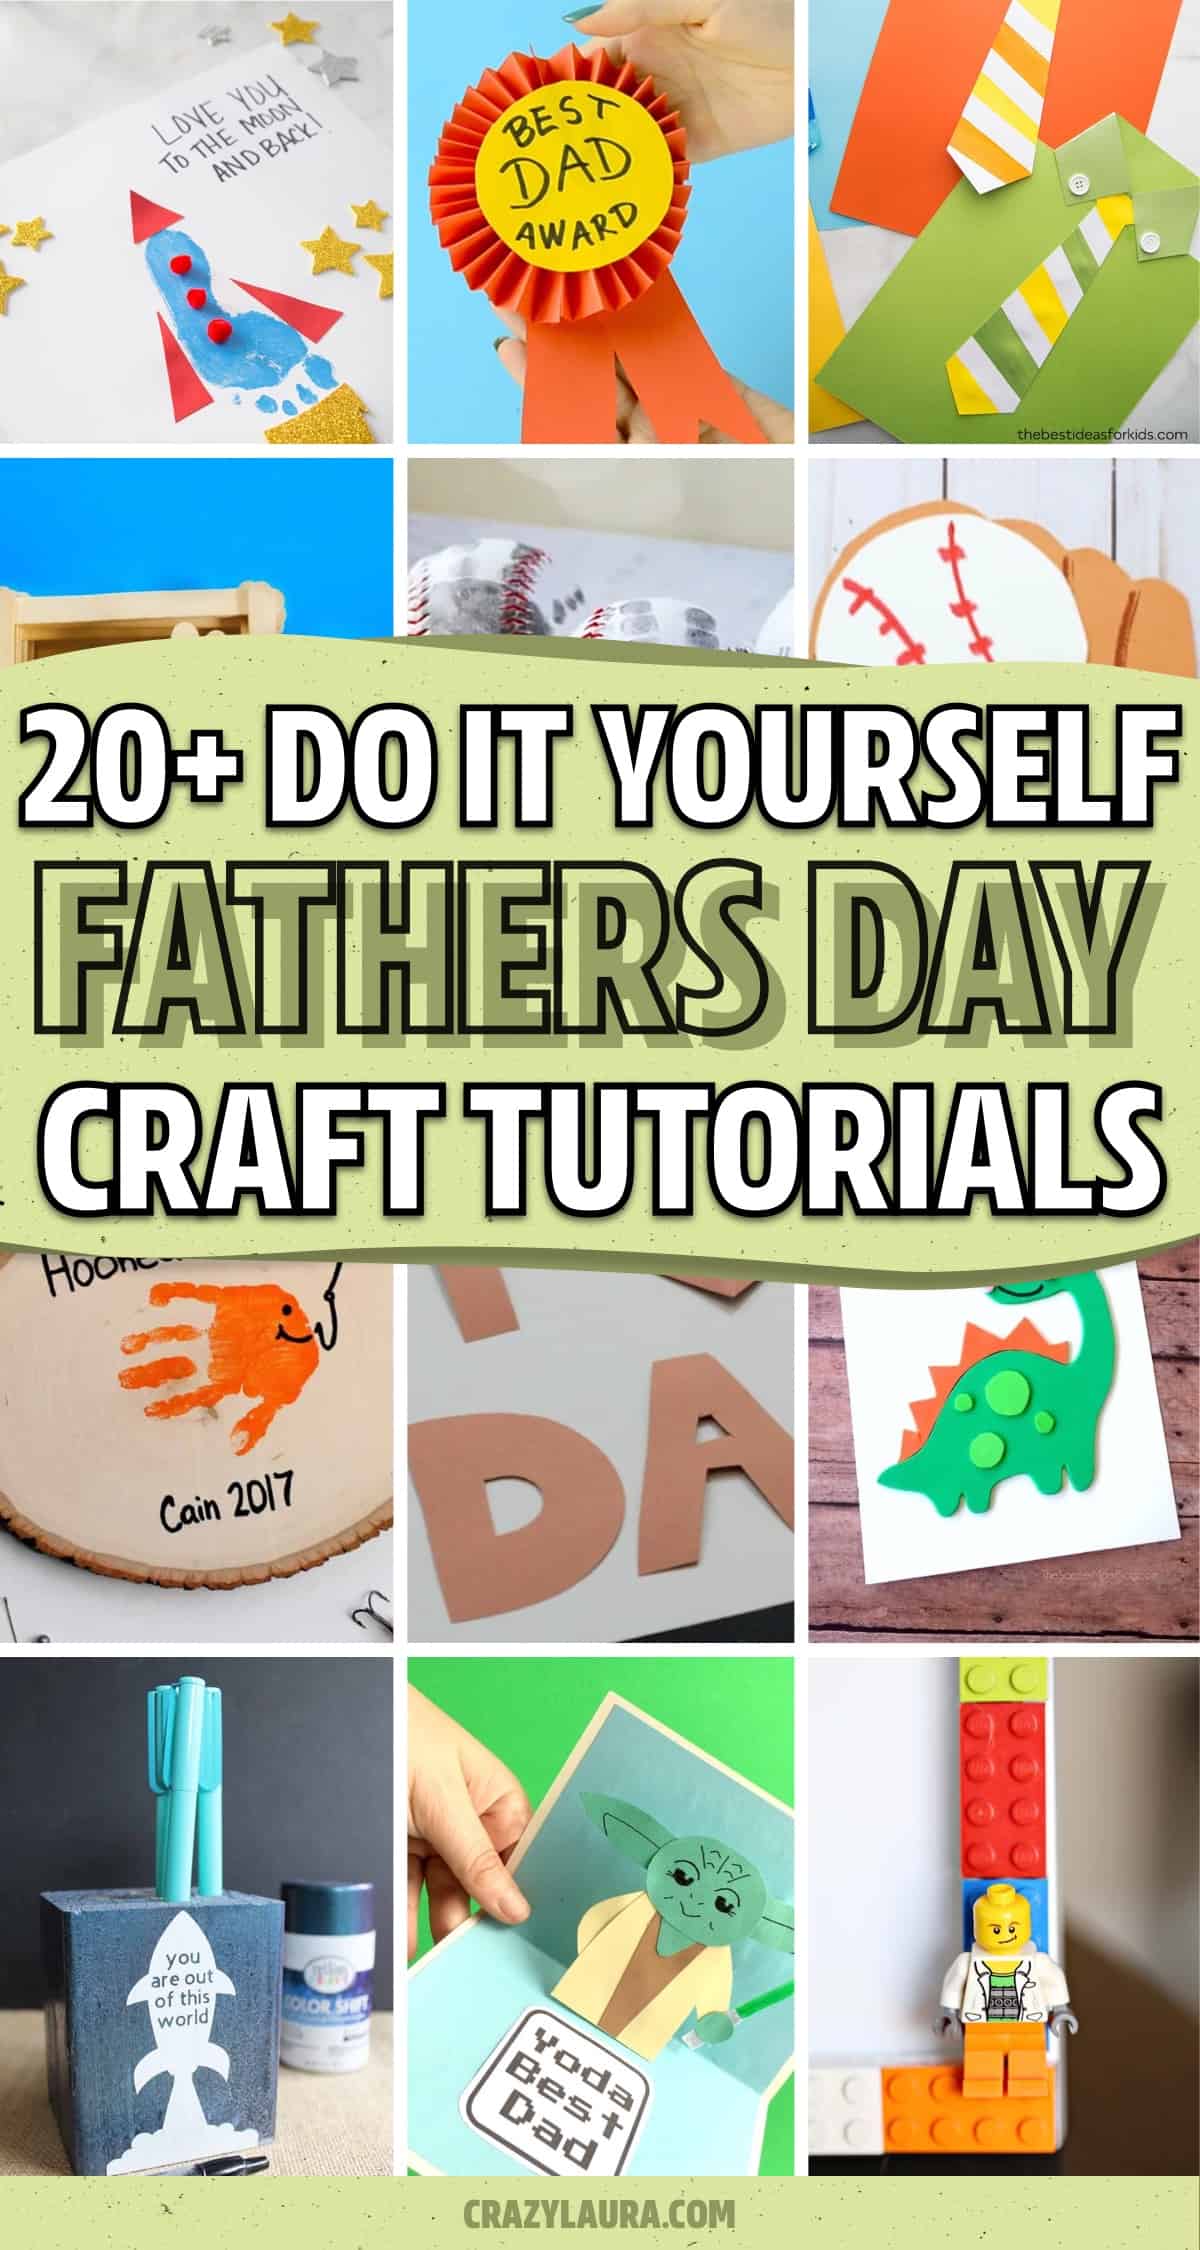 cheap and easy fathers day gift ideas